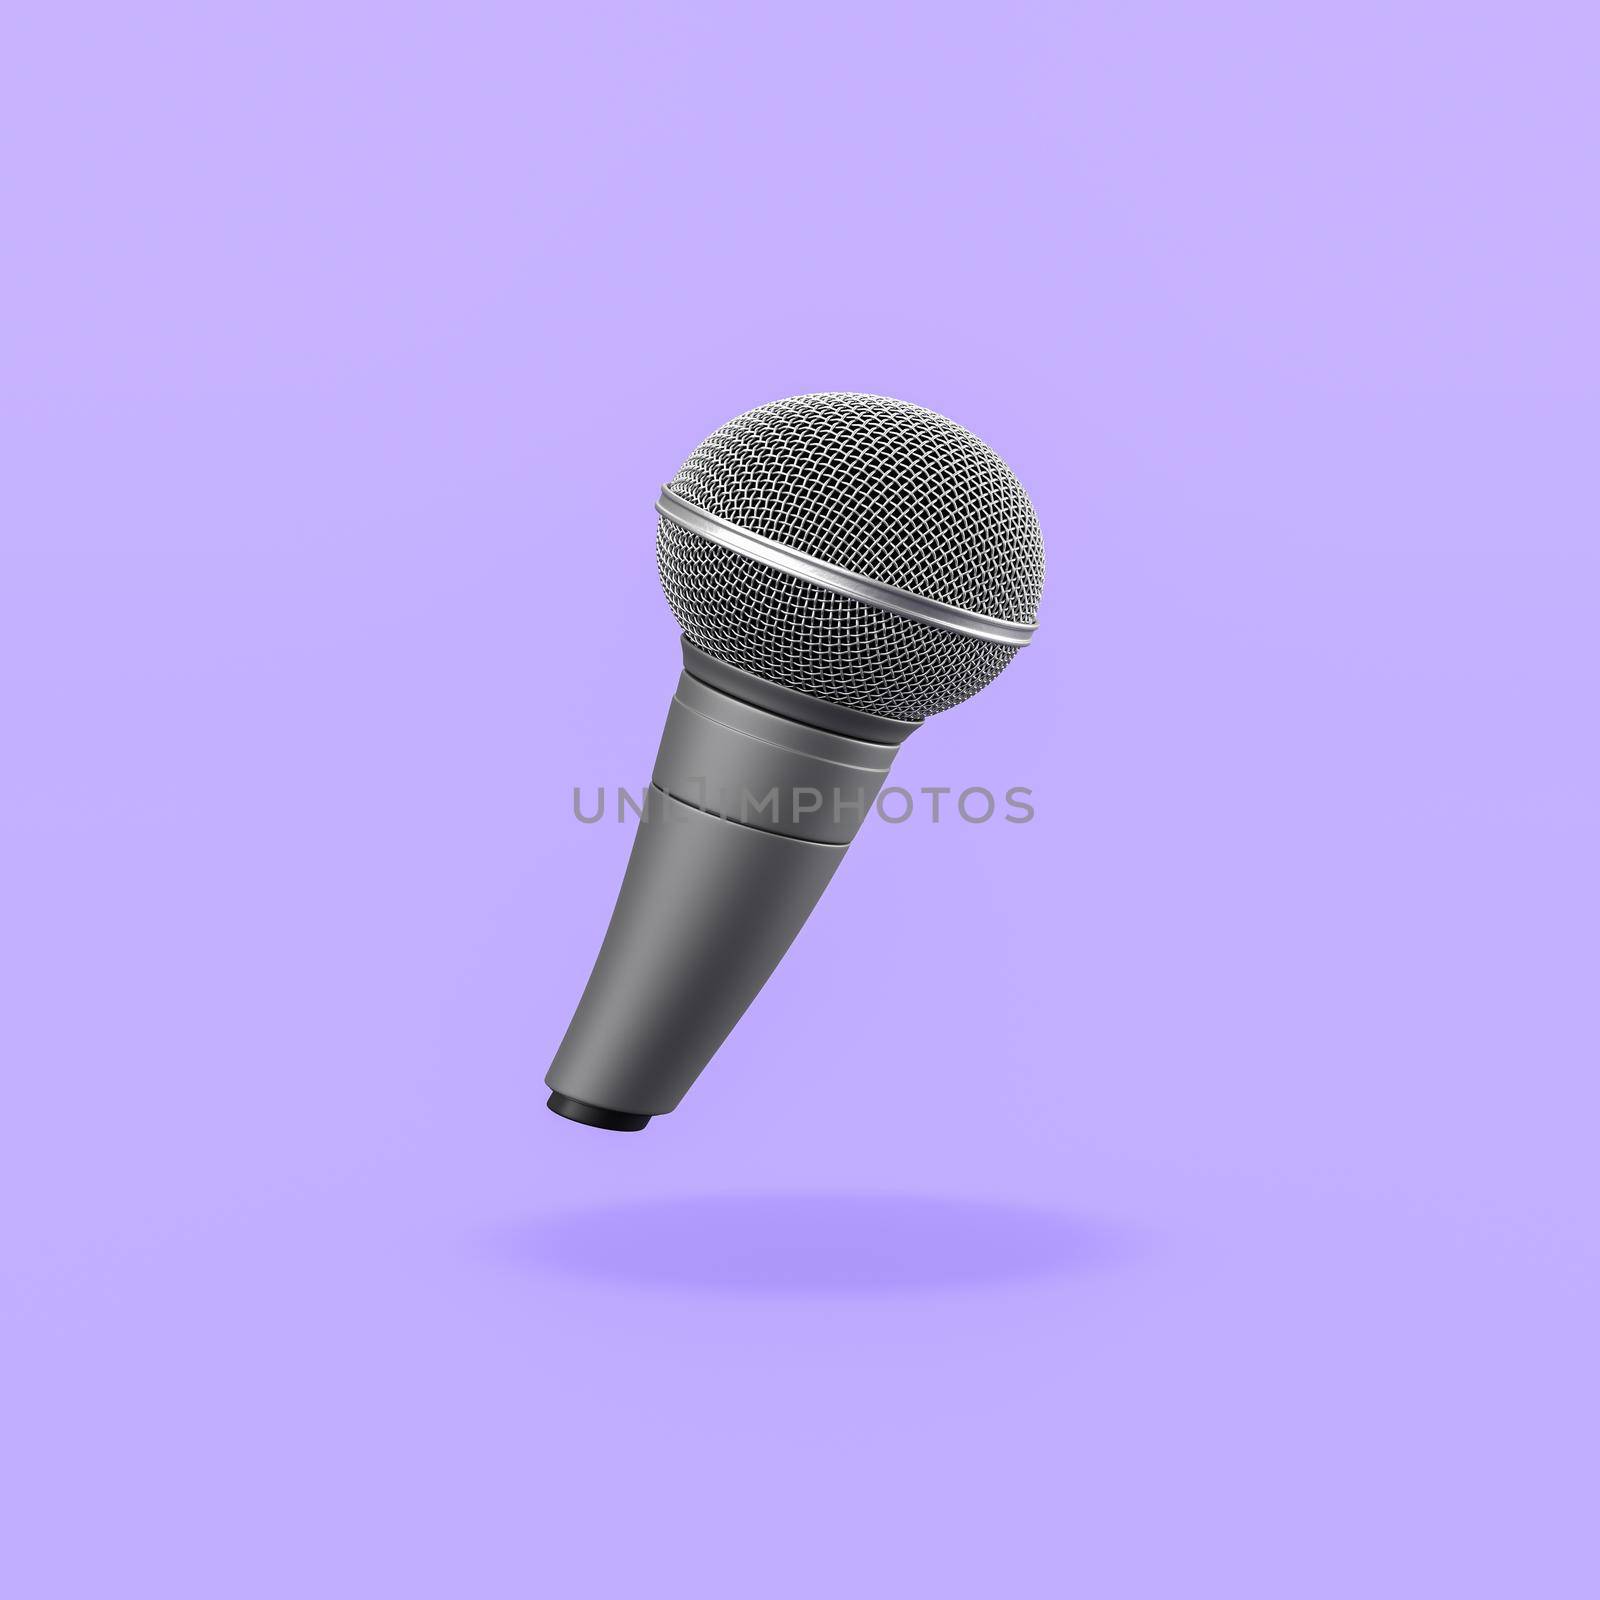 Metallic Microphone on Purple Background by make